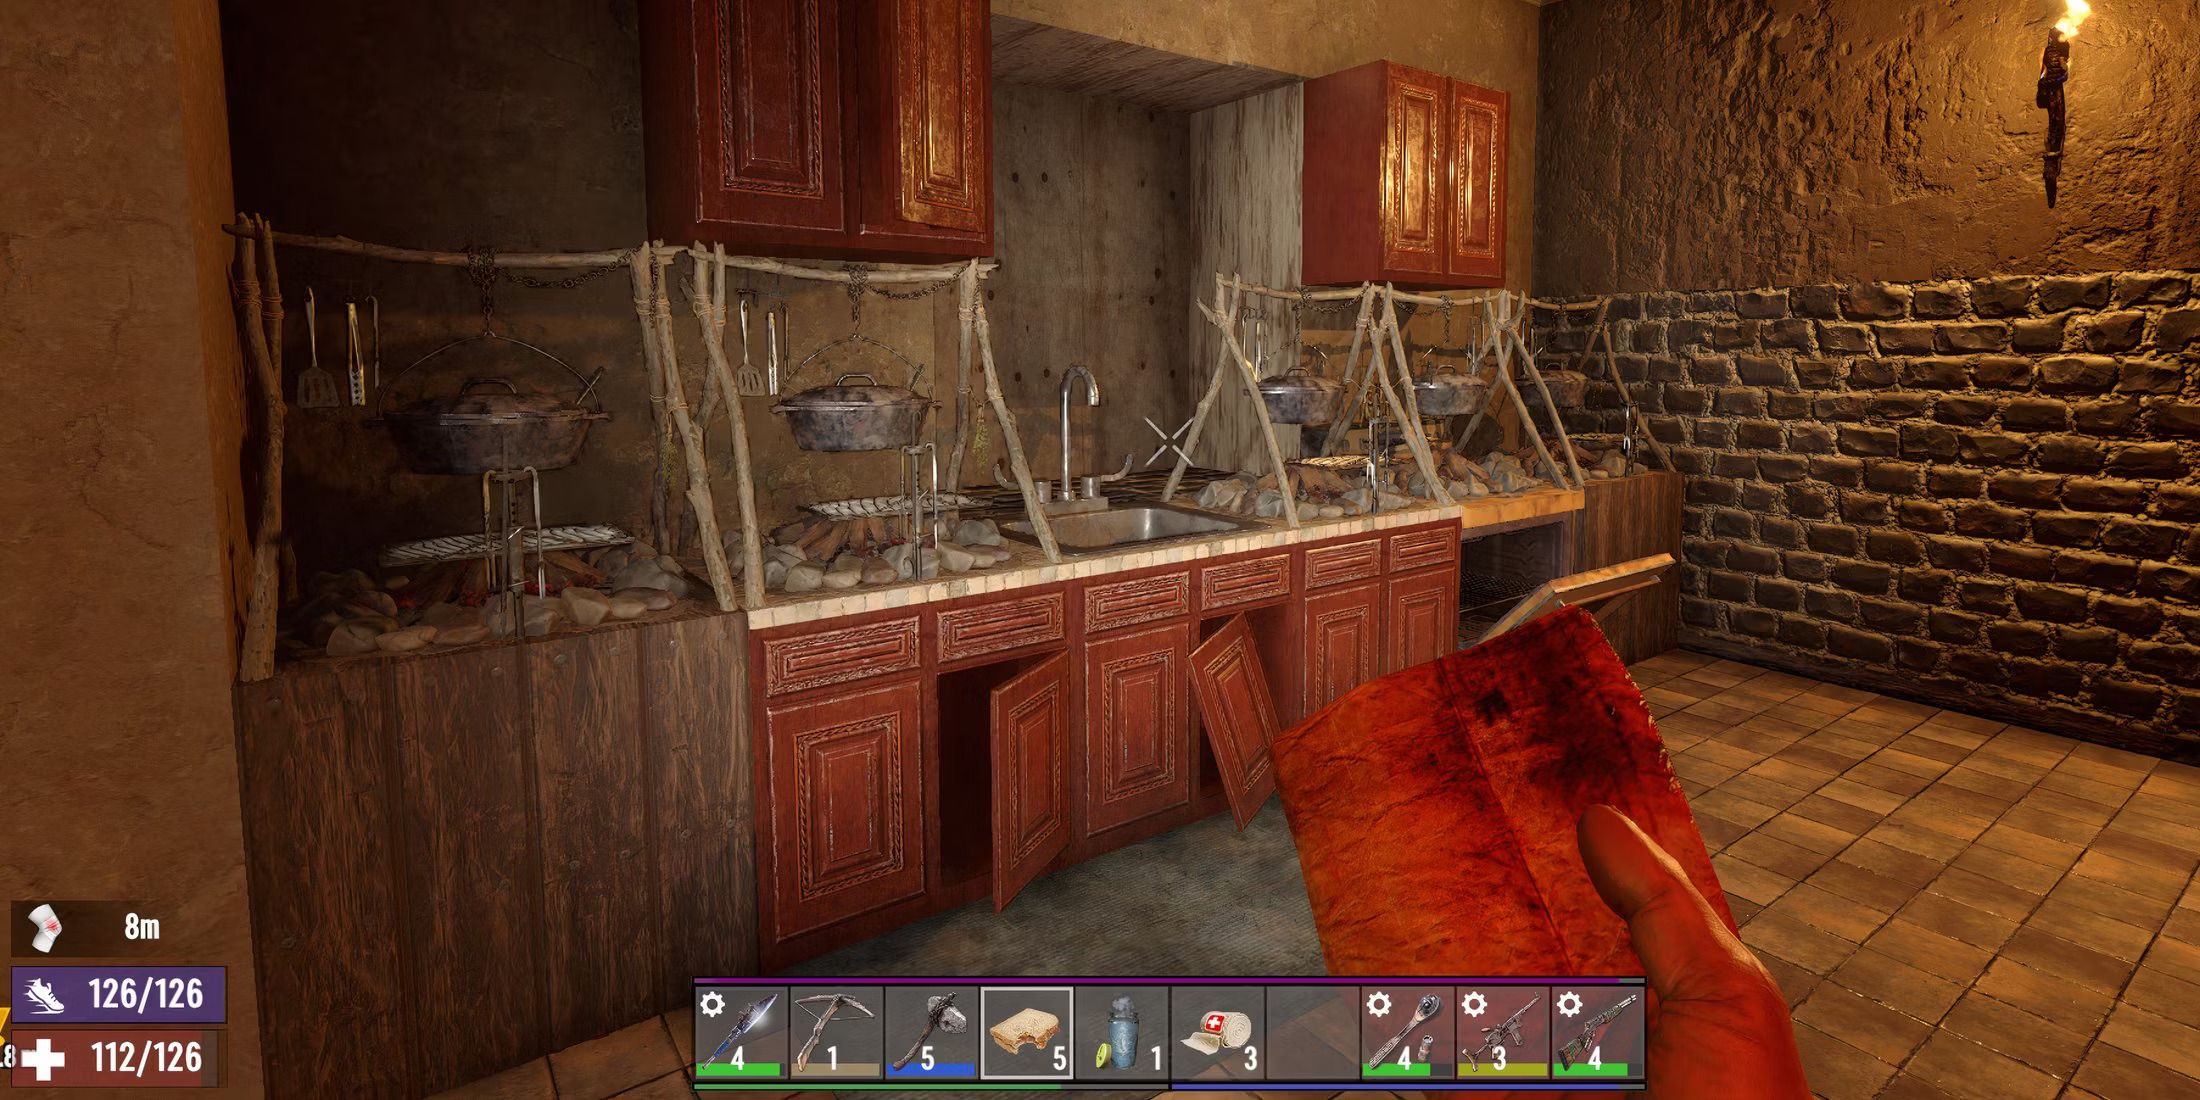 7-days-to-die-player-horde-home-base-cooking-stations.jpg